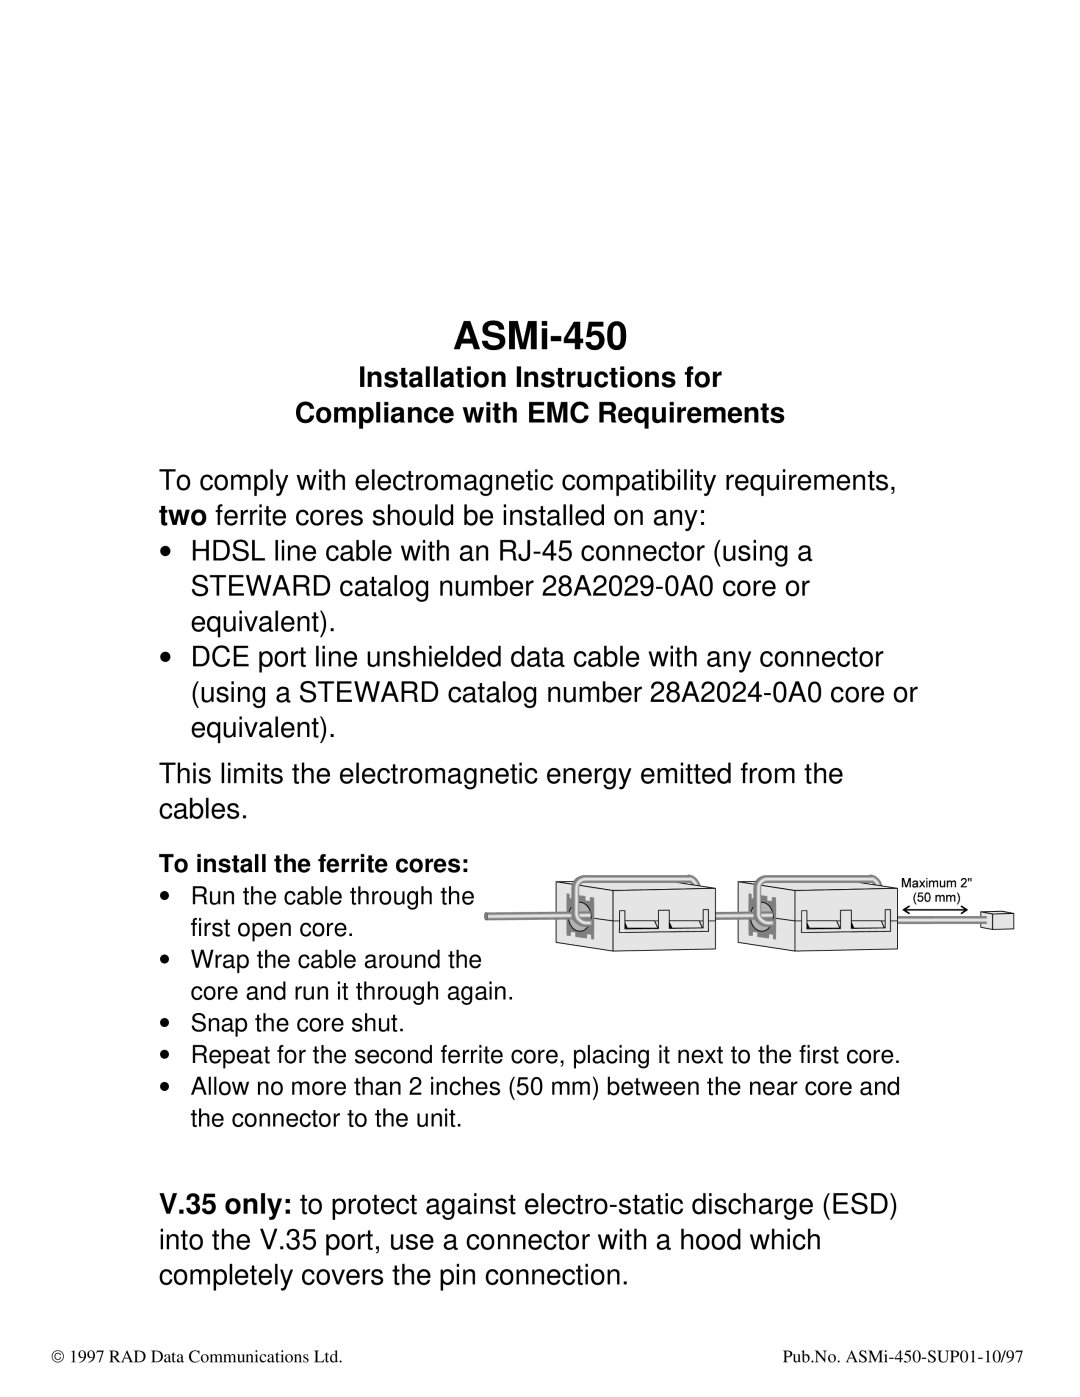 RAD Data comm ASMI-450 operation manual Installation Instructions for Compliance with EMC Requirements, ASMi-450 